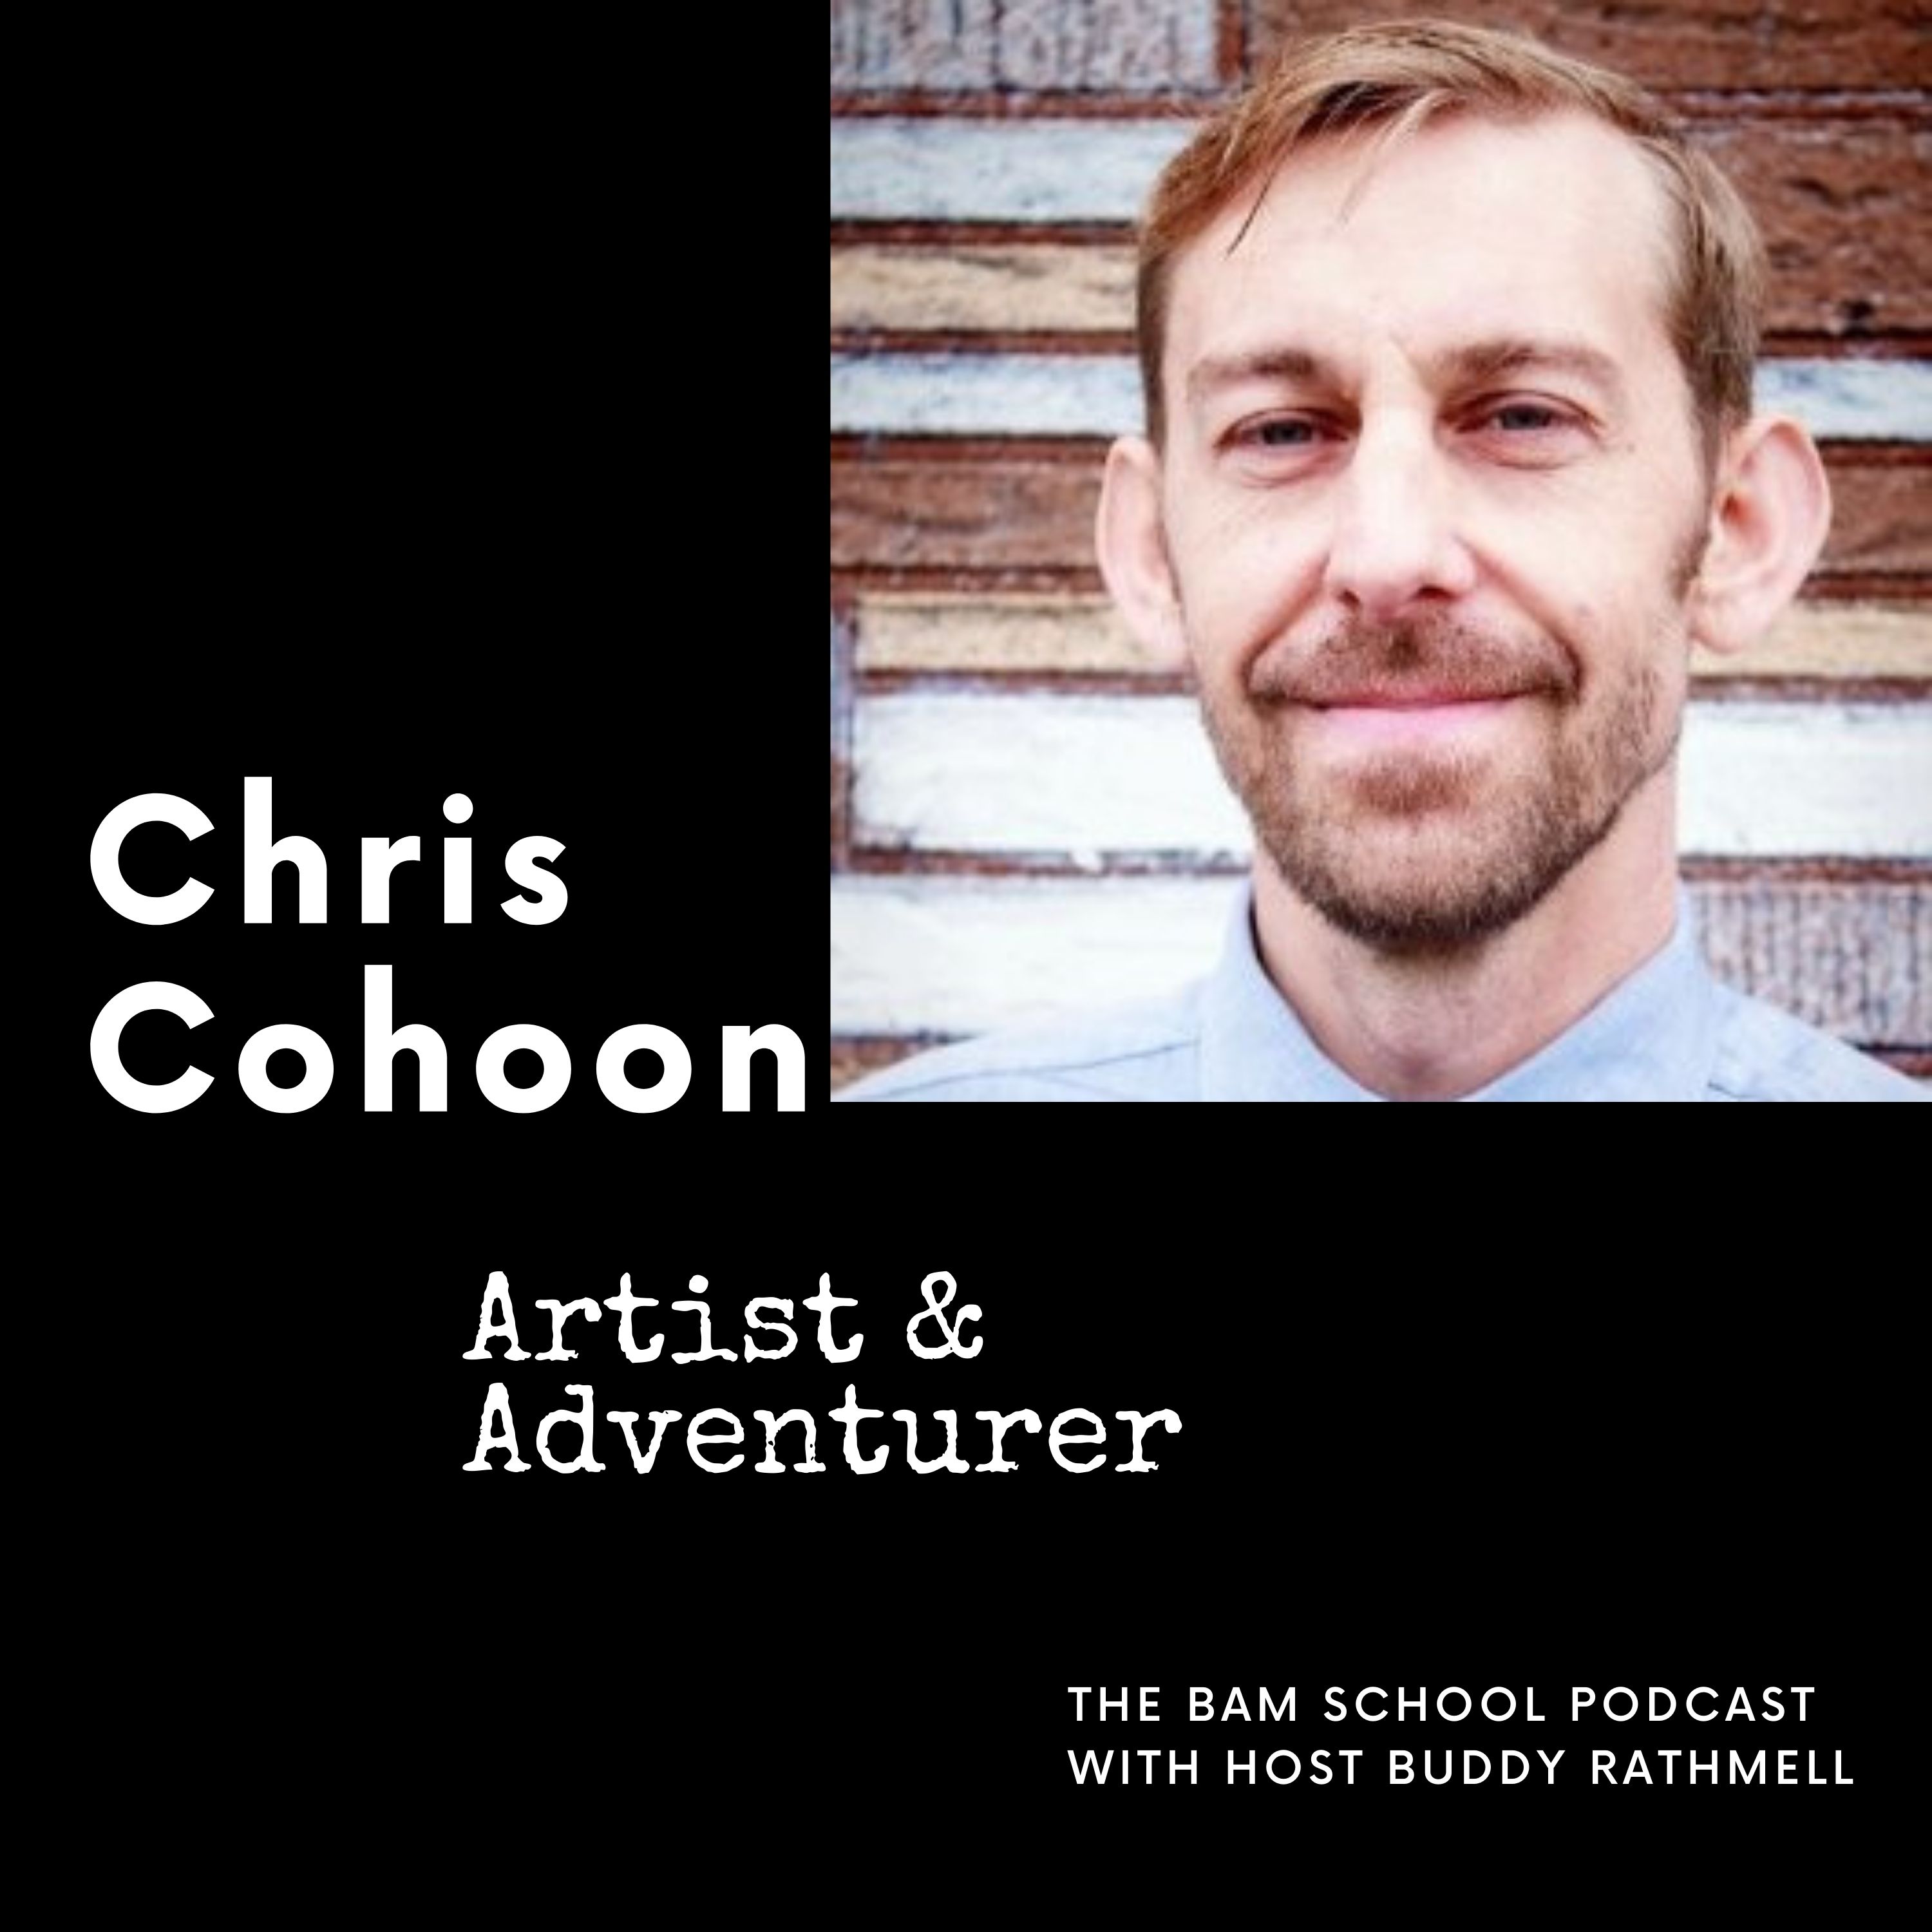 Artist and Adventurer & What the heck is an NFT? - Chris Cohoon